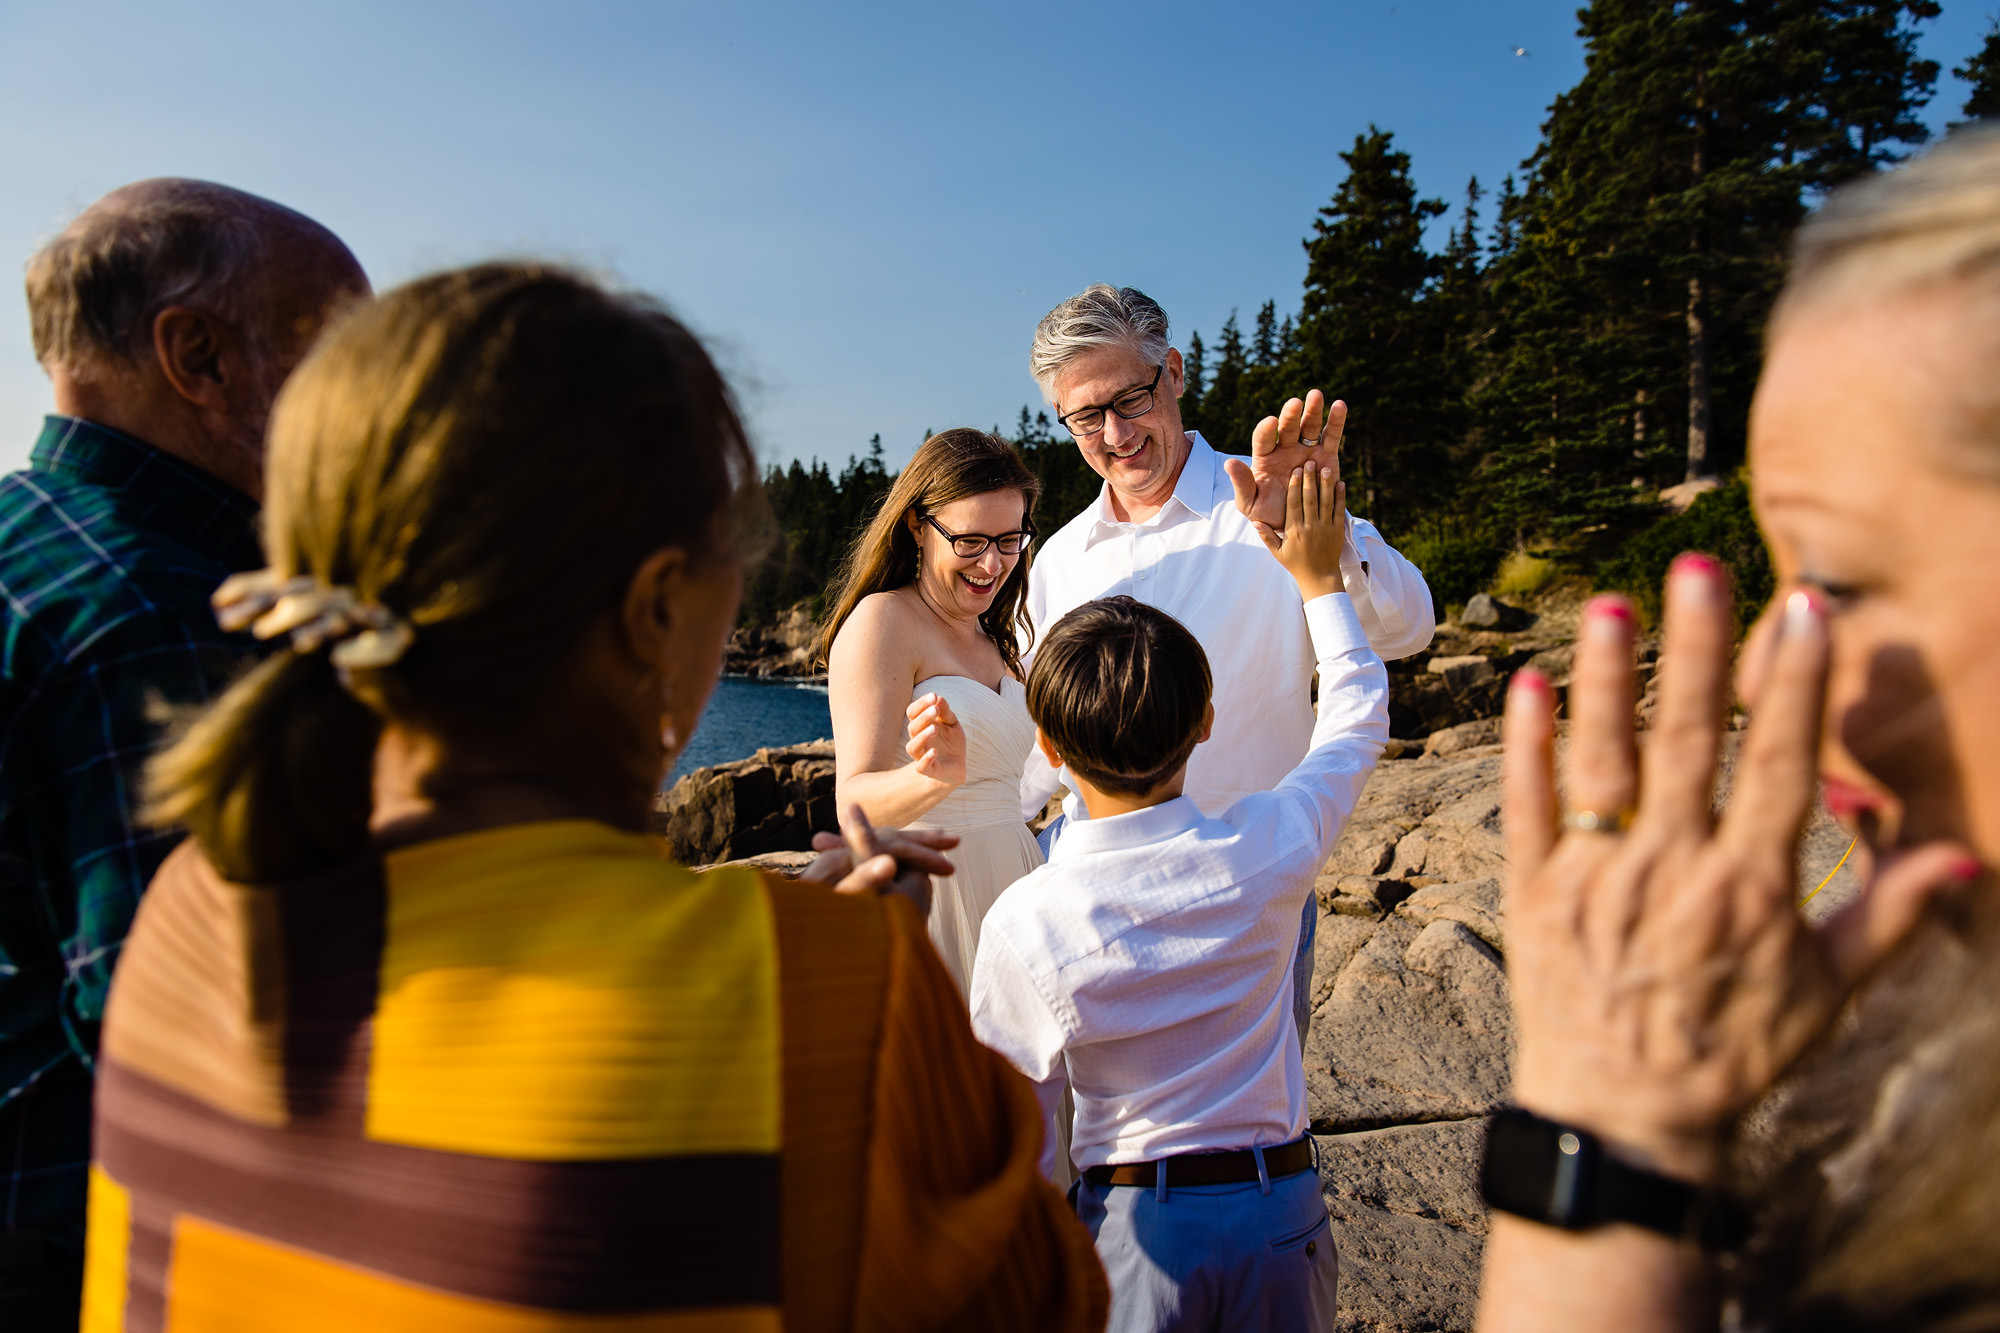 The bride and groom give a high five to the groom's son while another family member cries